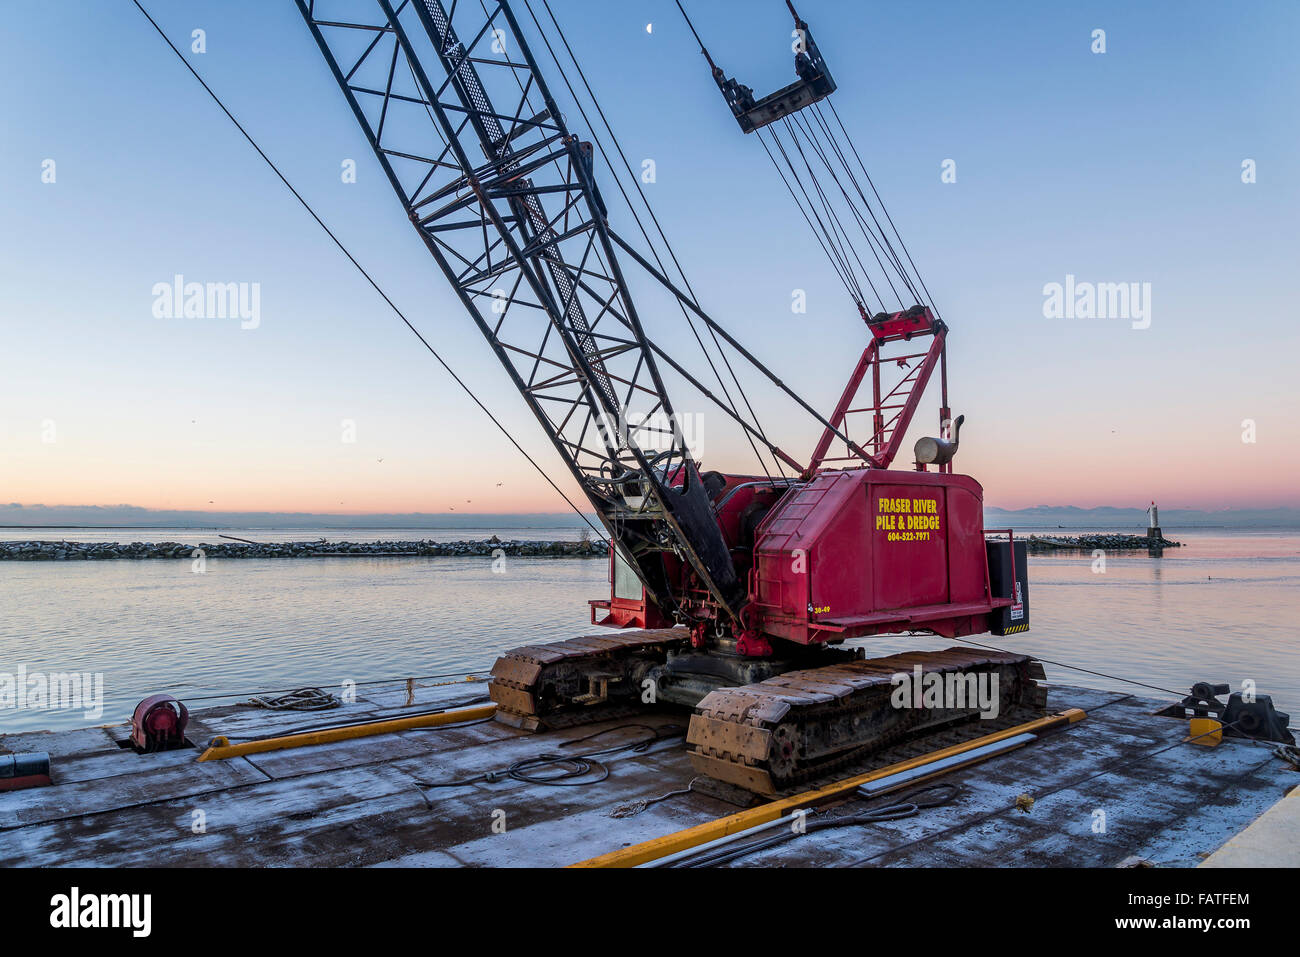 Fraser River Pile and Dredge, pile driving crane on barge, Steveston, Richmond, British Columbia, Canada, Stock Photo